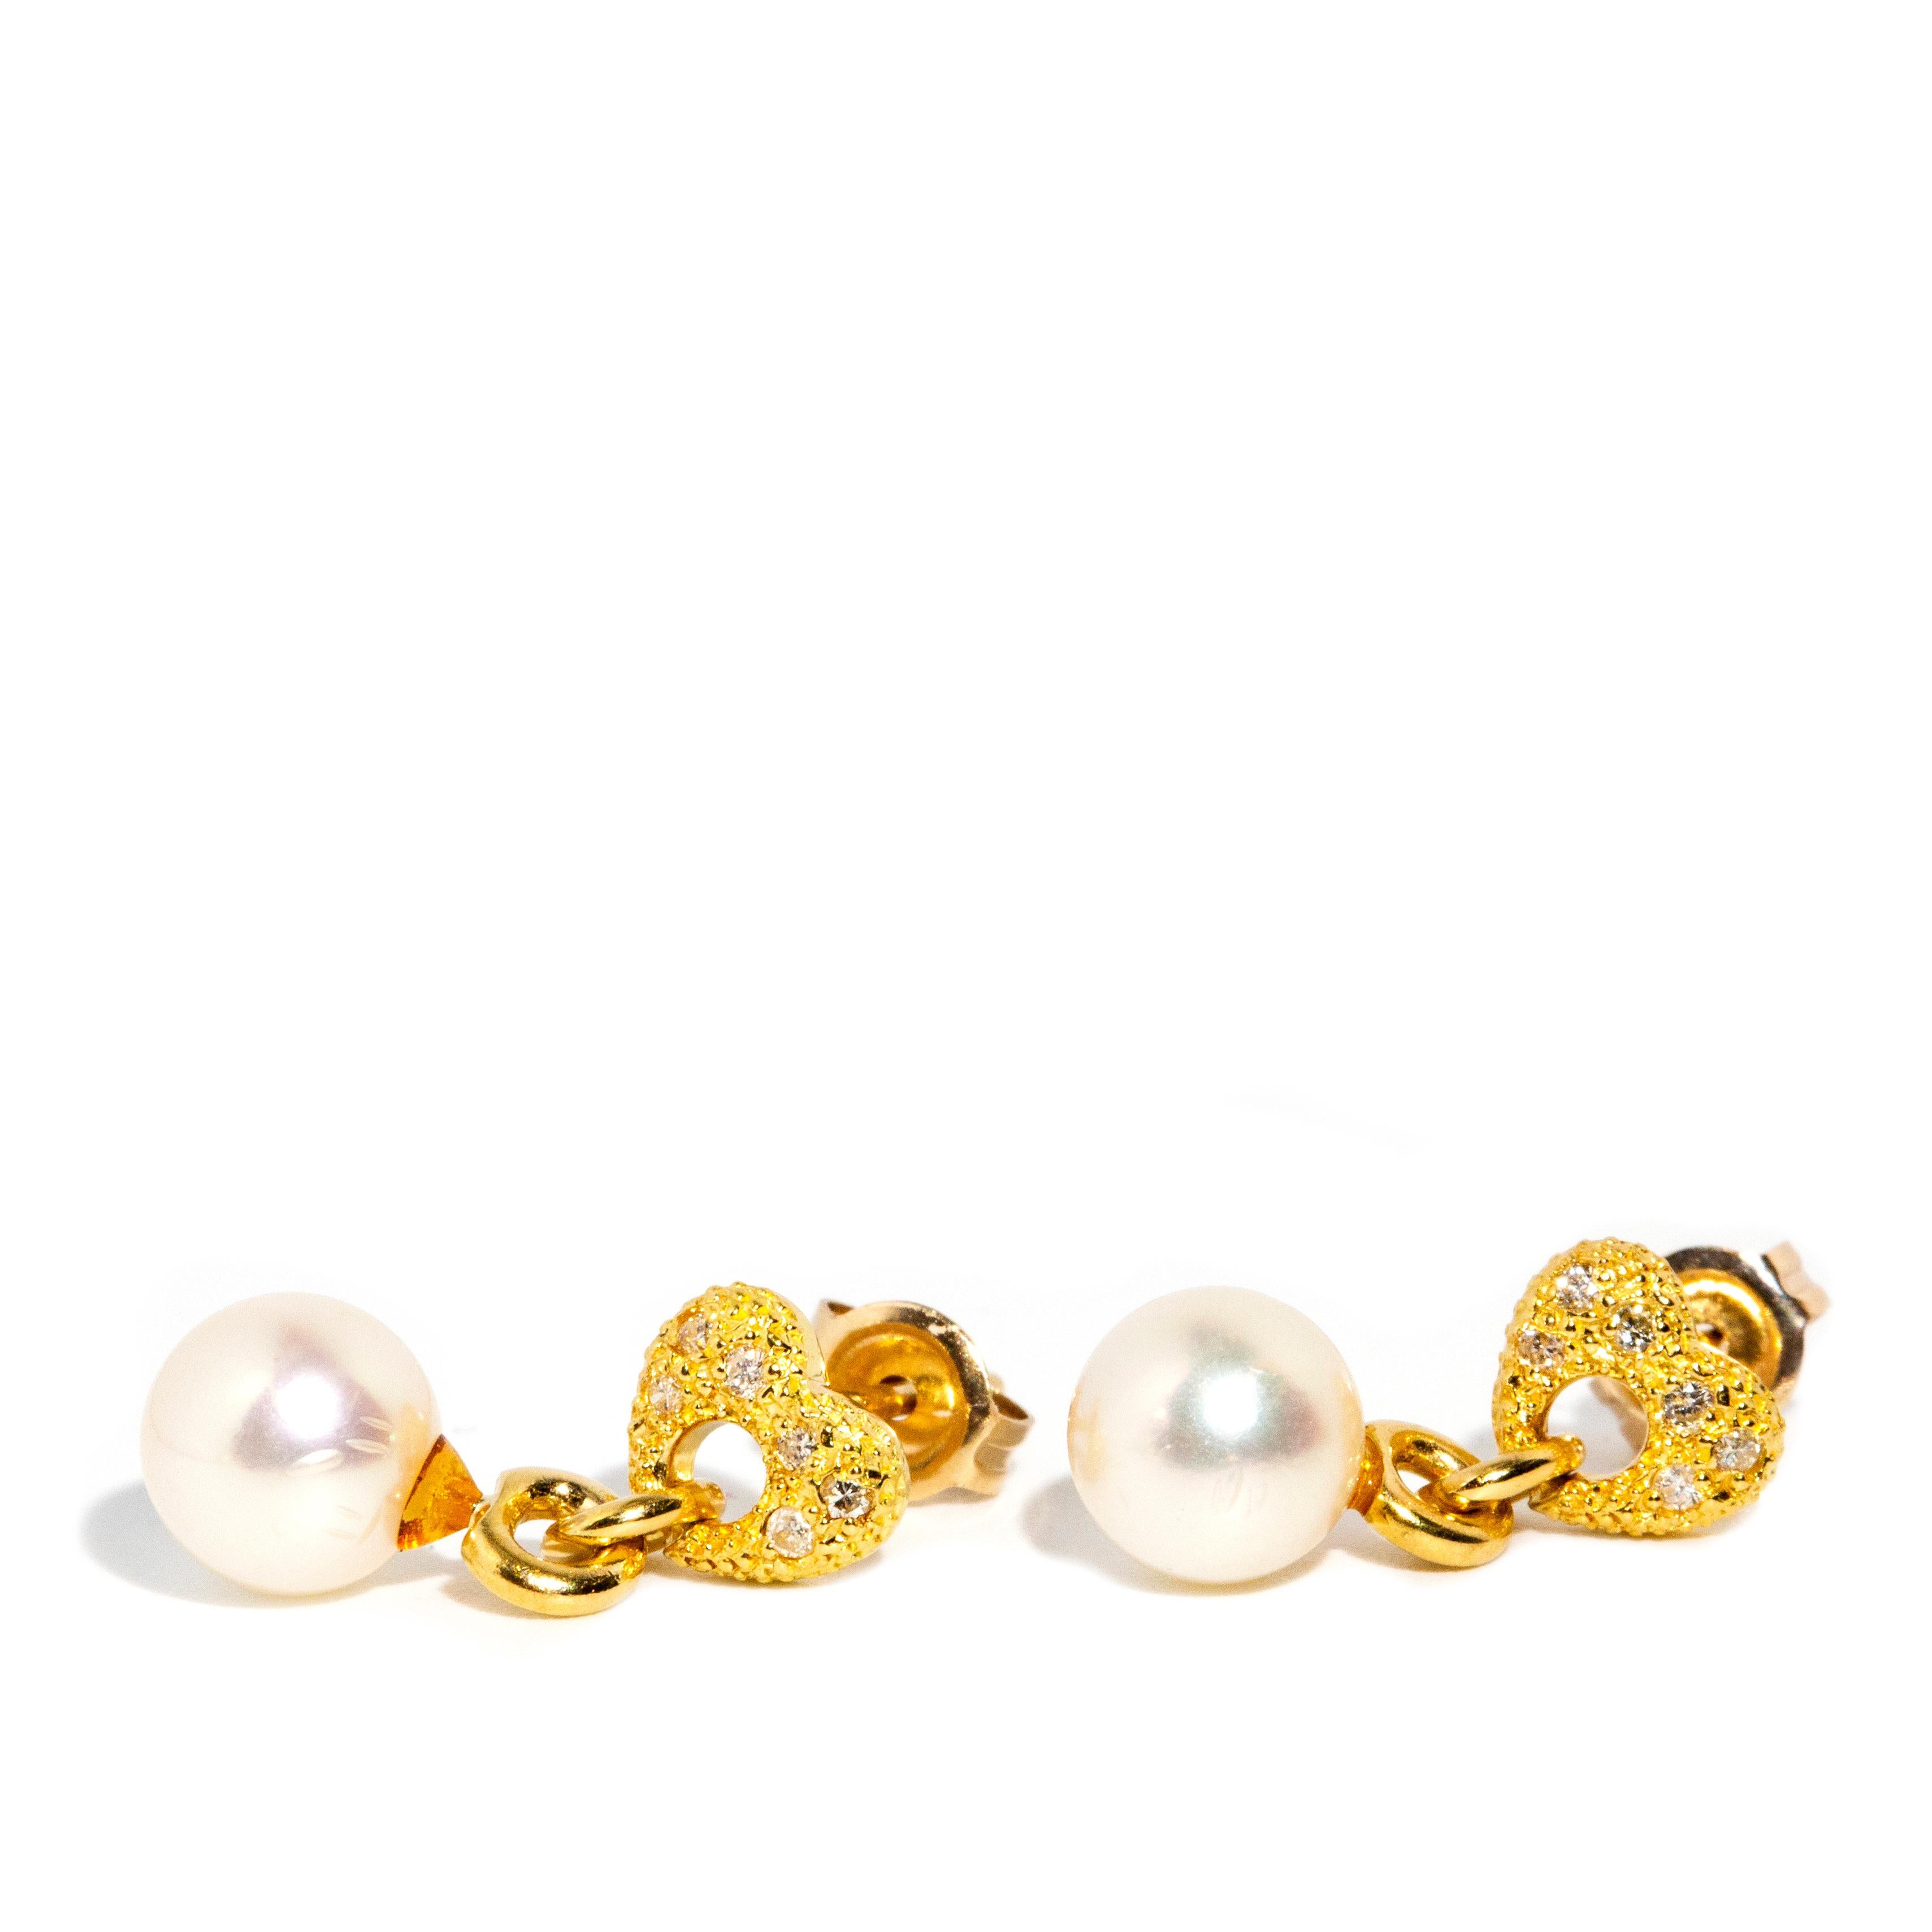 Crafted in 18 carat gold, these adorable vintage earrings each feature a plethora of diamonds in textured bubble heart settings with a gorgeous freshwater pearl suspended below. They are named The Almira Earrings. They look adorable no matter the